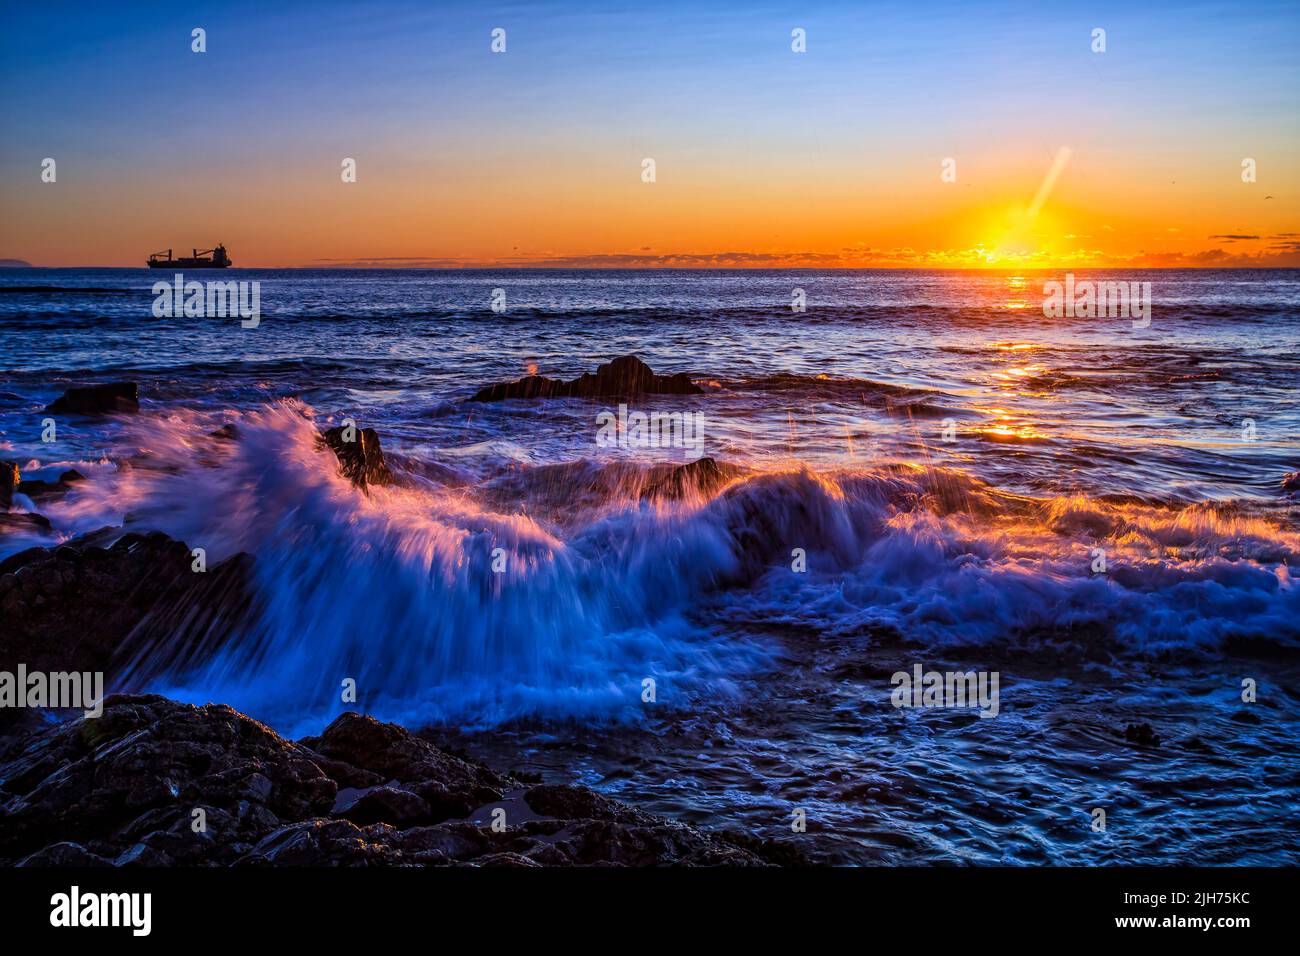 Splash of wave lit by rising sun off Pebbly beach in Forter town of Pacific ocean coast in Australia at sunrise. Stock Photo